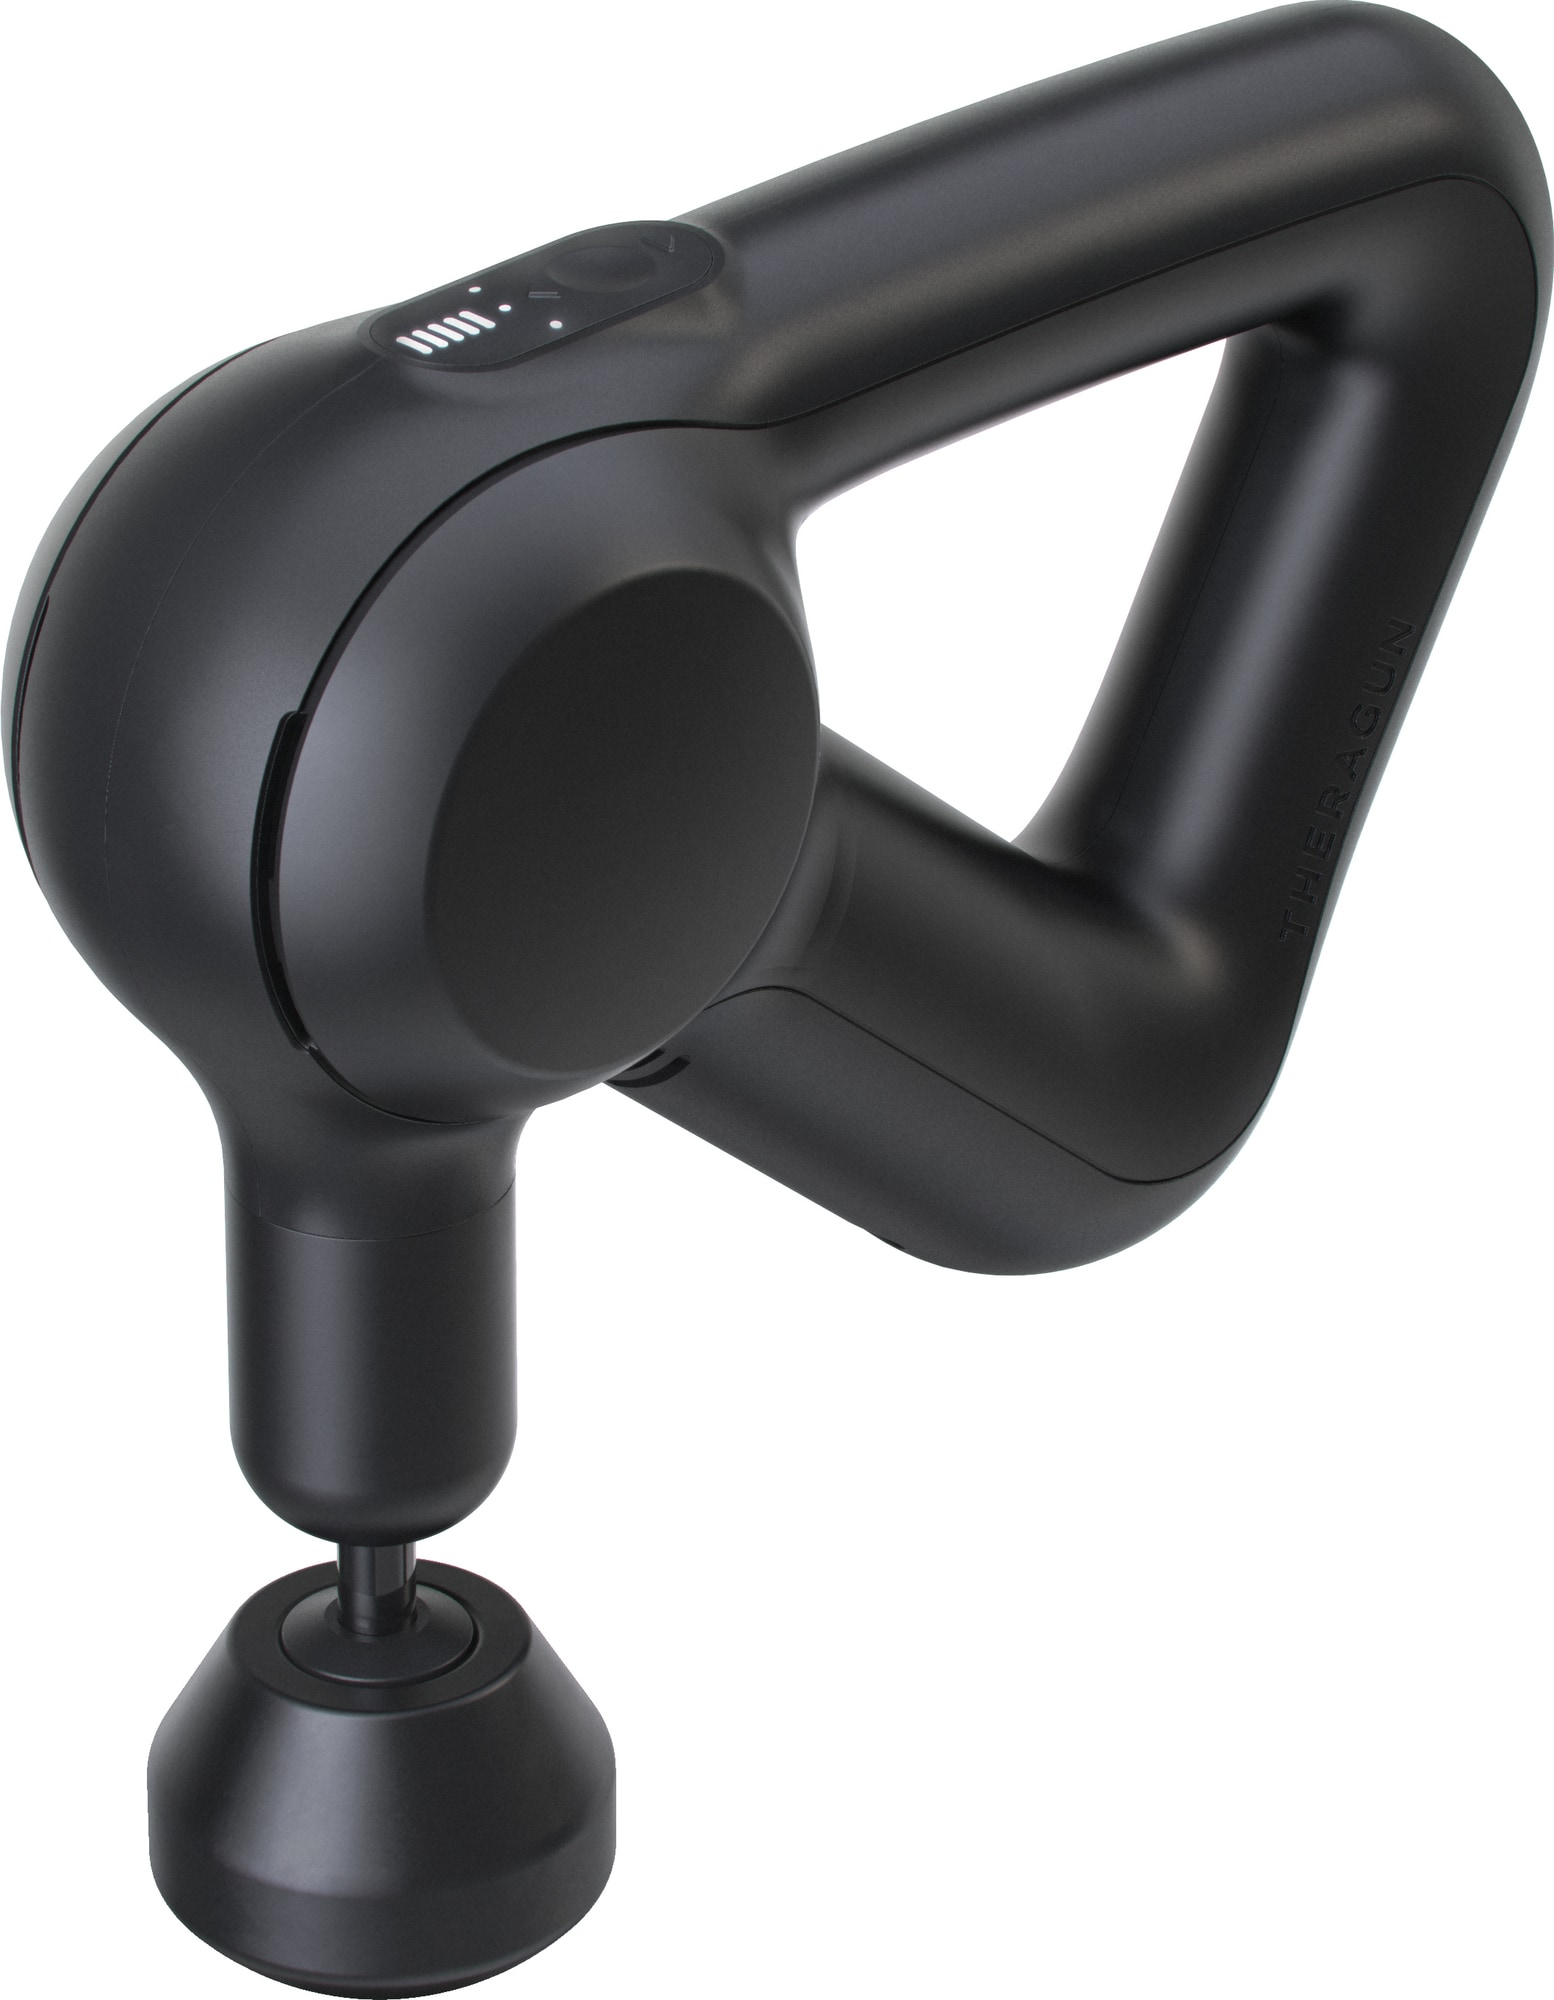 Theragun Prime 4th Gen Percussive Therapy Massager by Therabody thumbnail